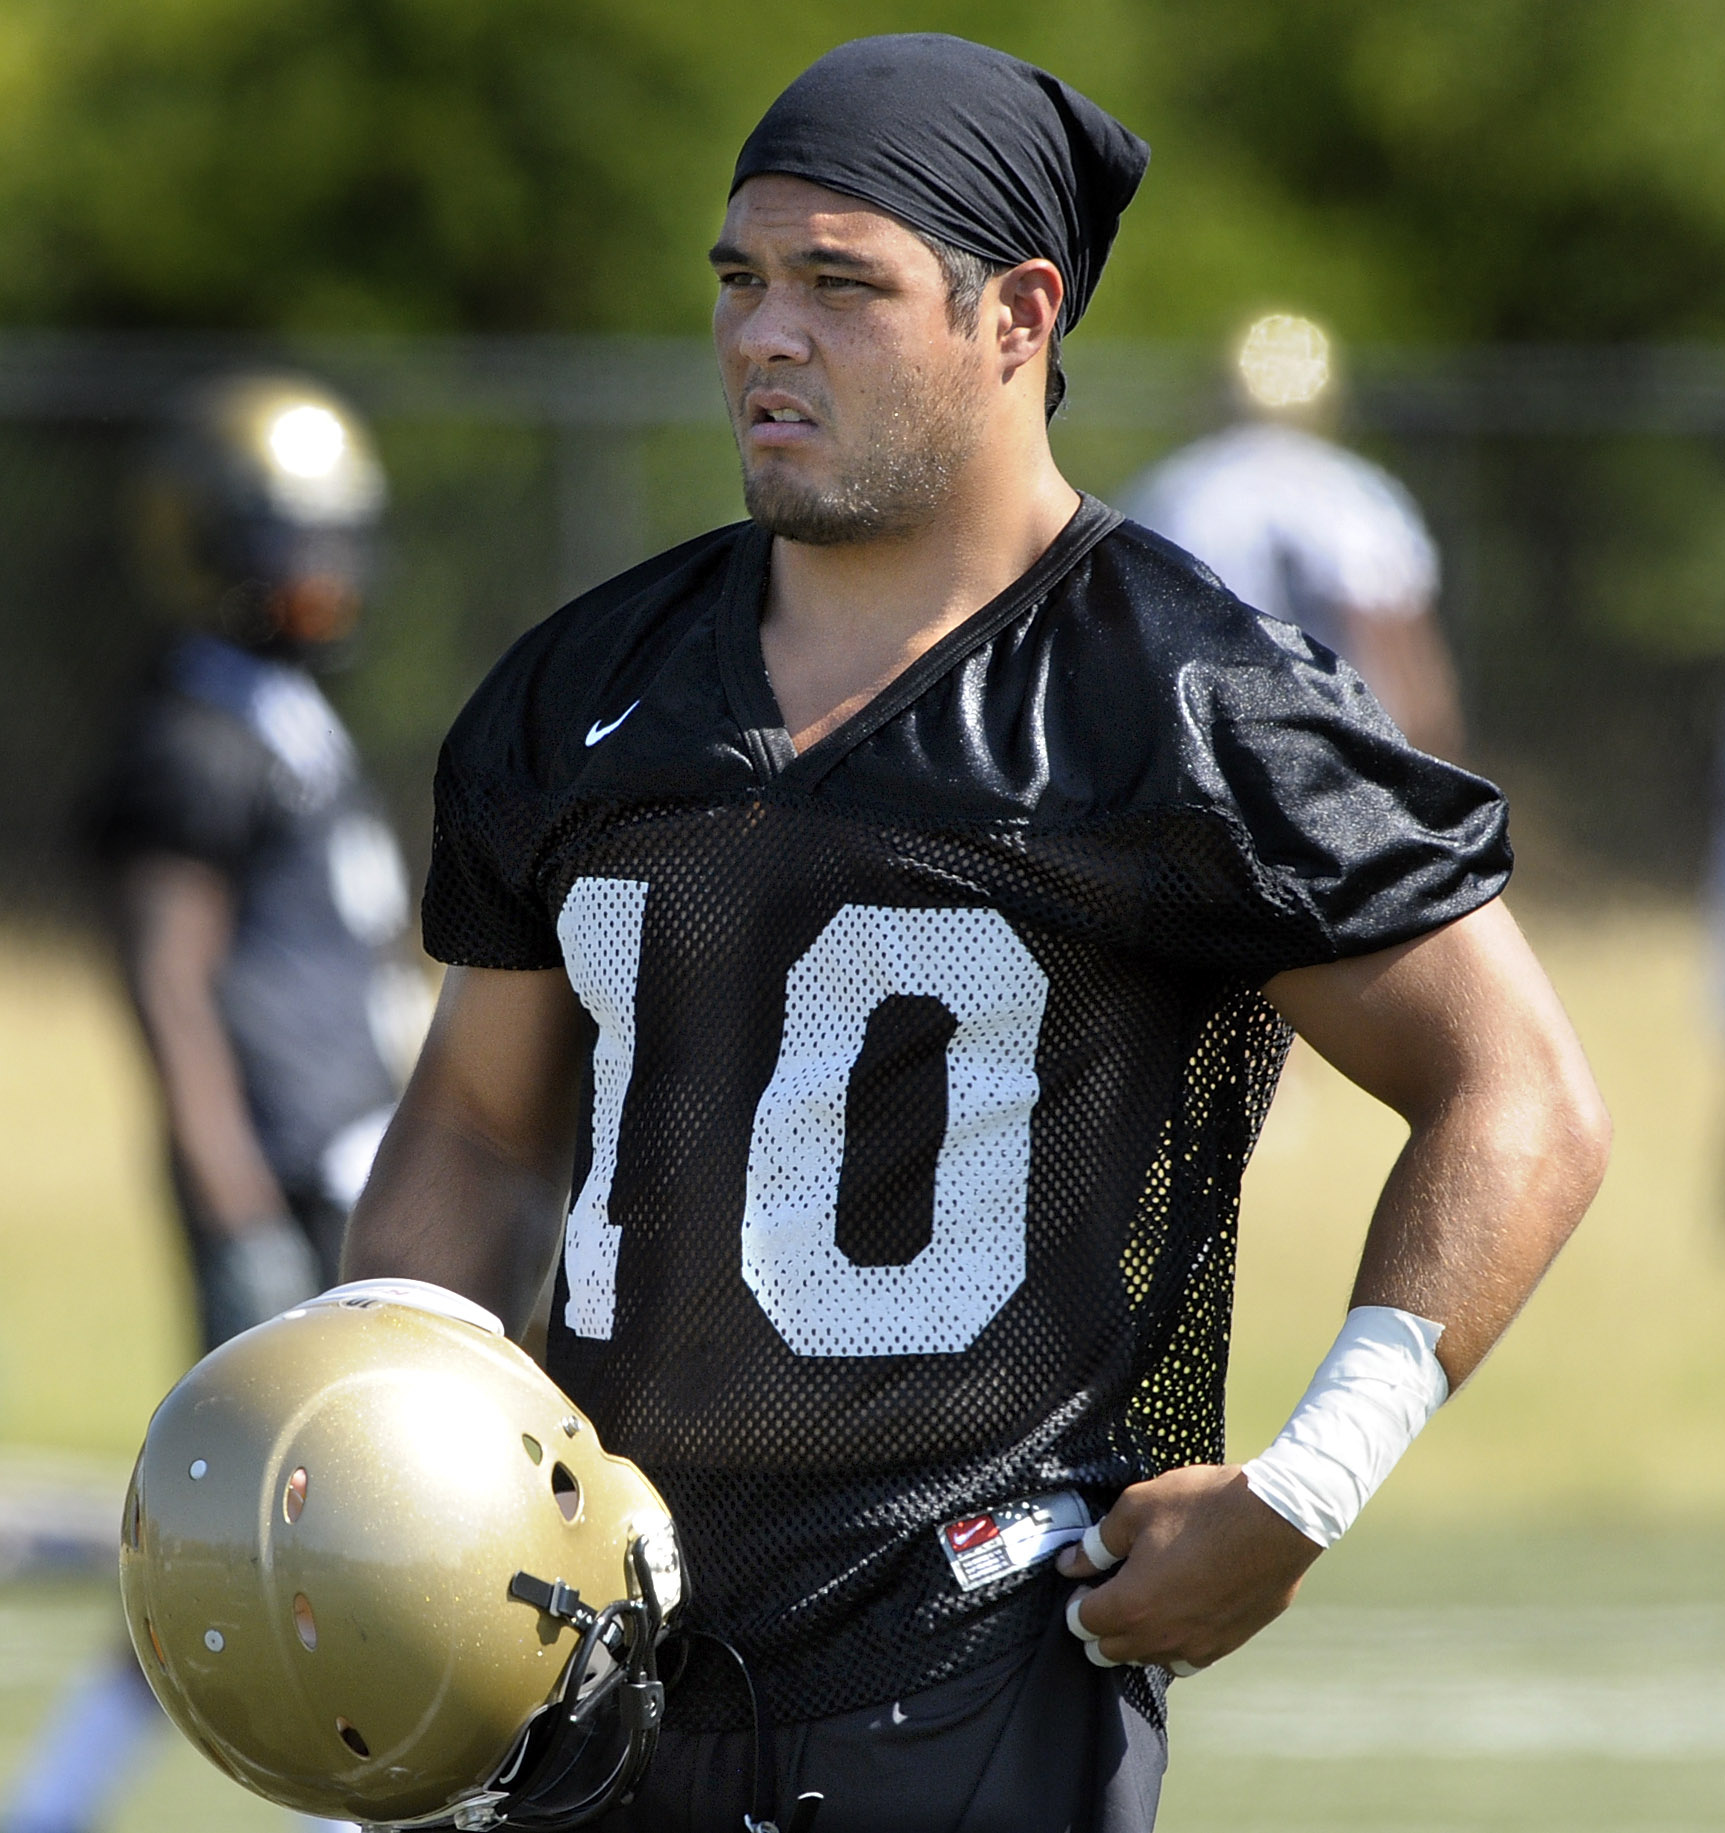 Ex-Vandal Keo works to catch on with Texans | The Spokesman-Review